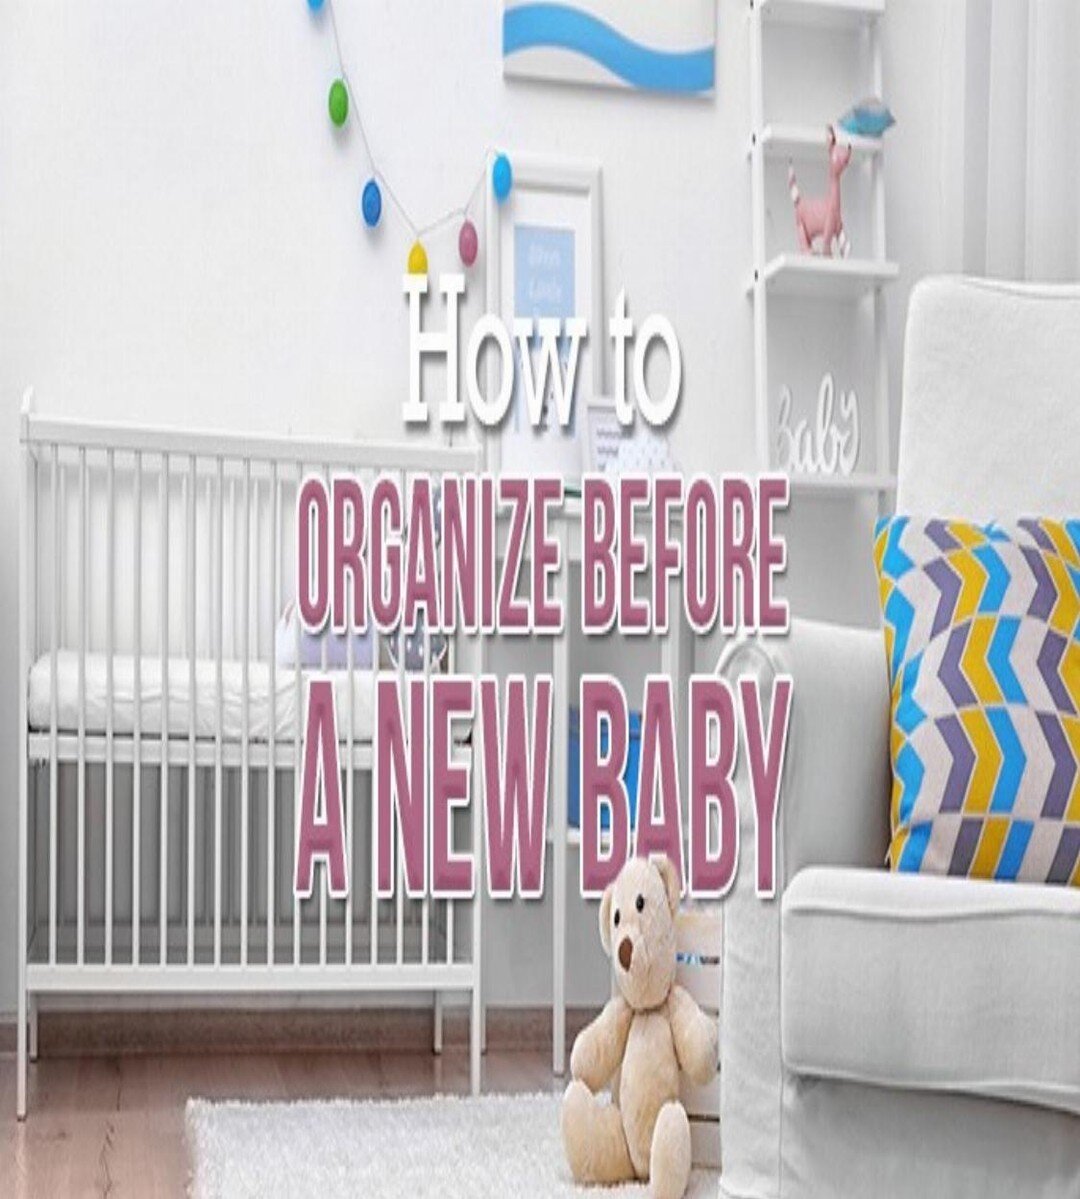 When you're expecting, it's easy to feel overwhelmed by all the things you need to do to prepare for your new baby. 

Here are some tips 📝 from organization experts to share all you need to know to tackle the most important home projects before yo